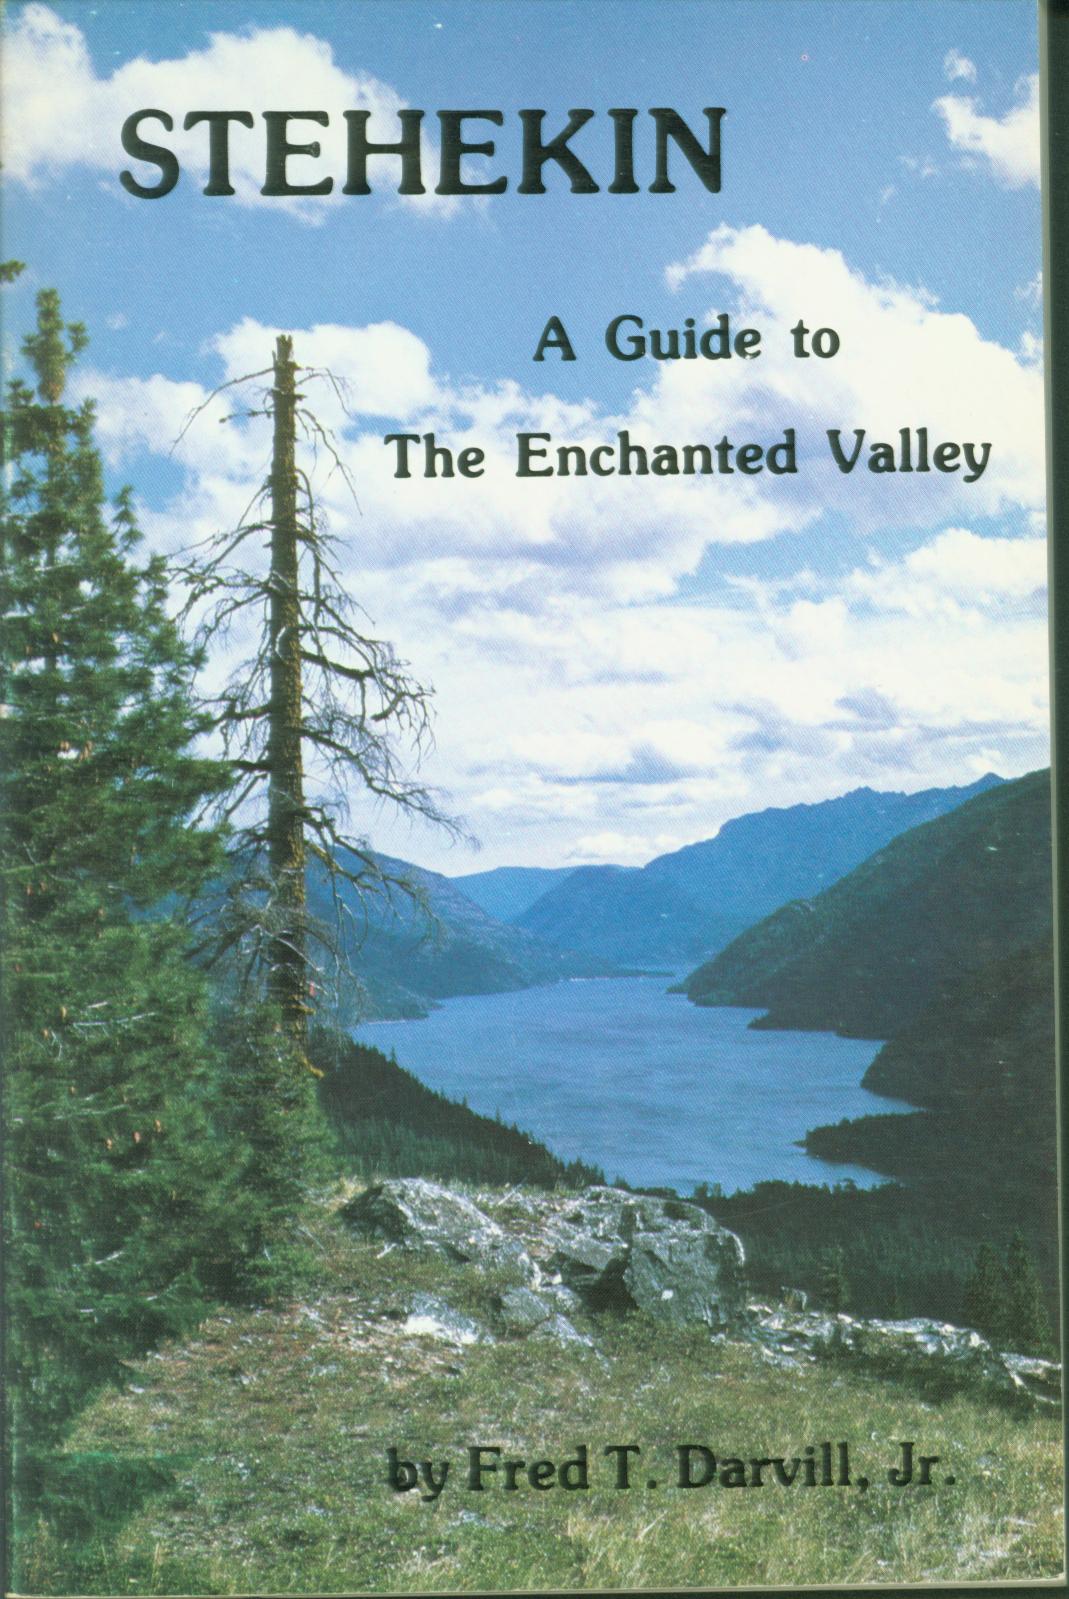 STEHEKIN--a guide to the Enchanted Valley.